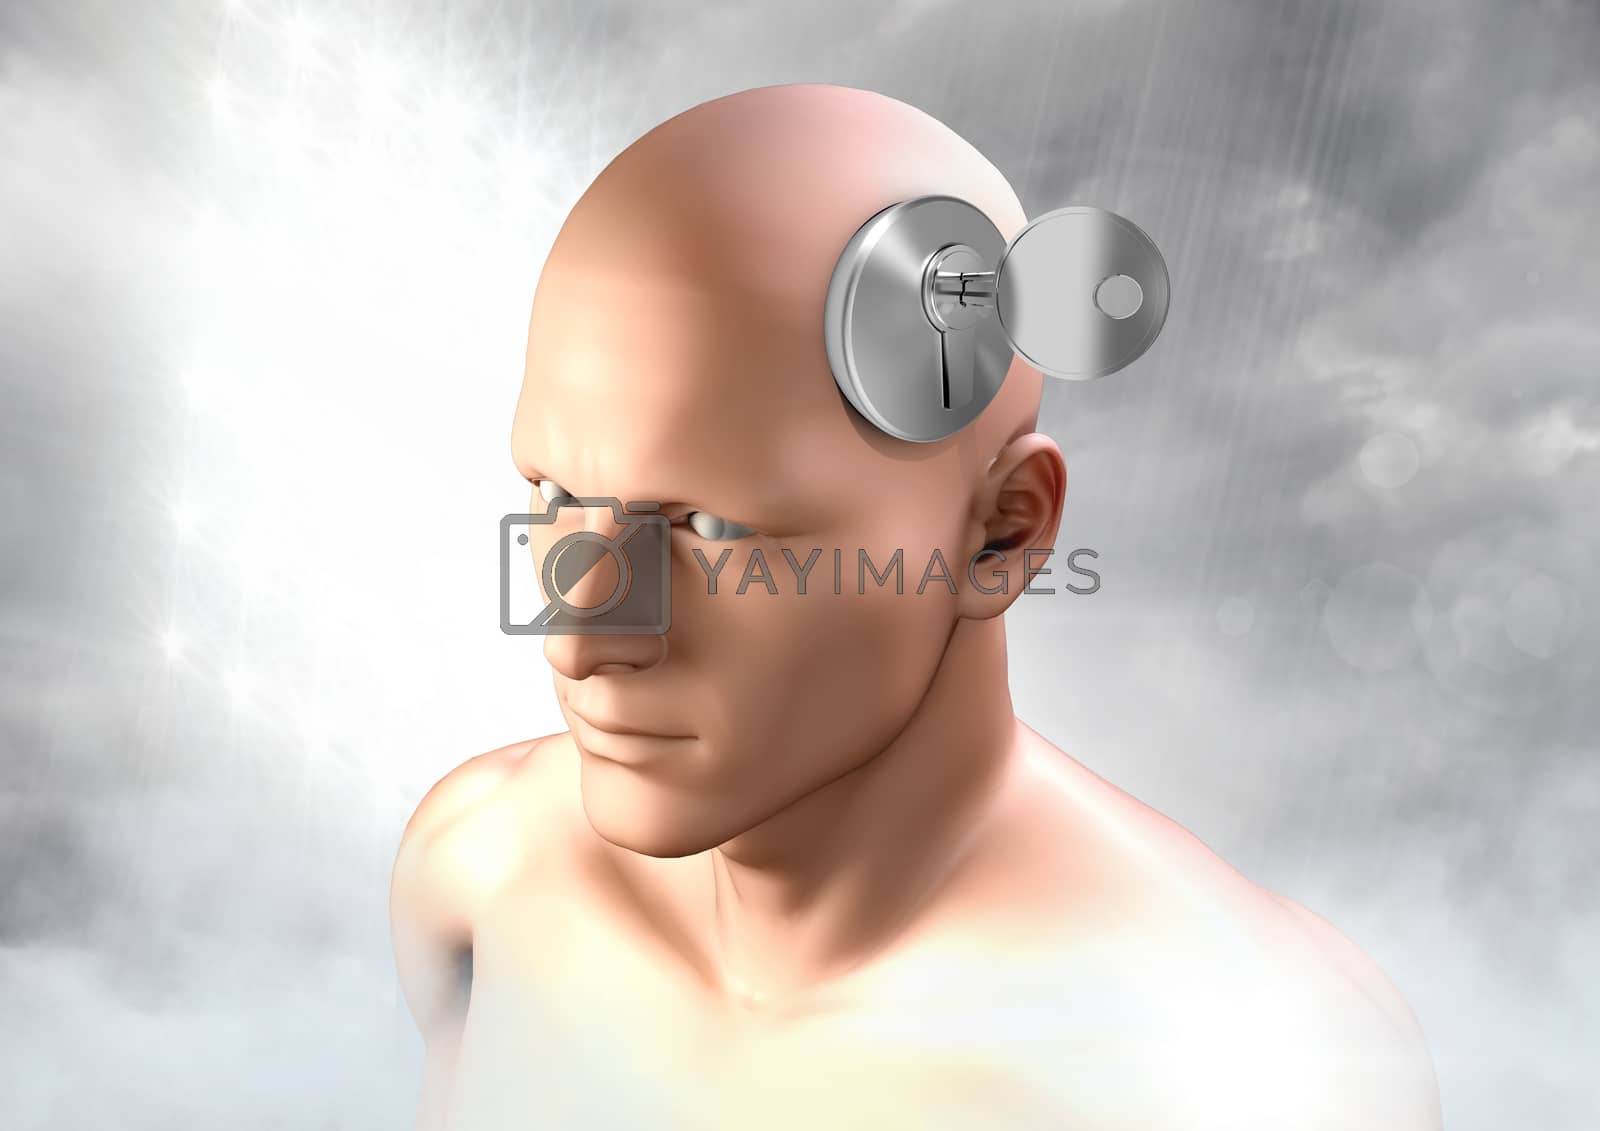 Royalty free image of Key unlocking the surreal imagination of 3D mans head by Wavebreakmedia